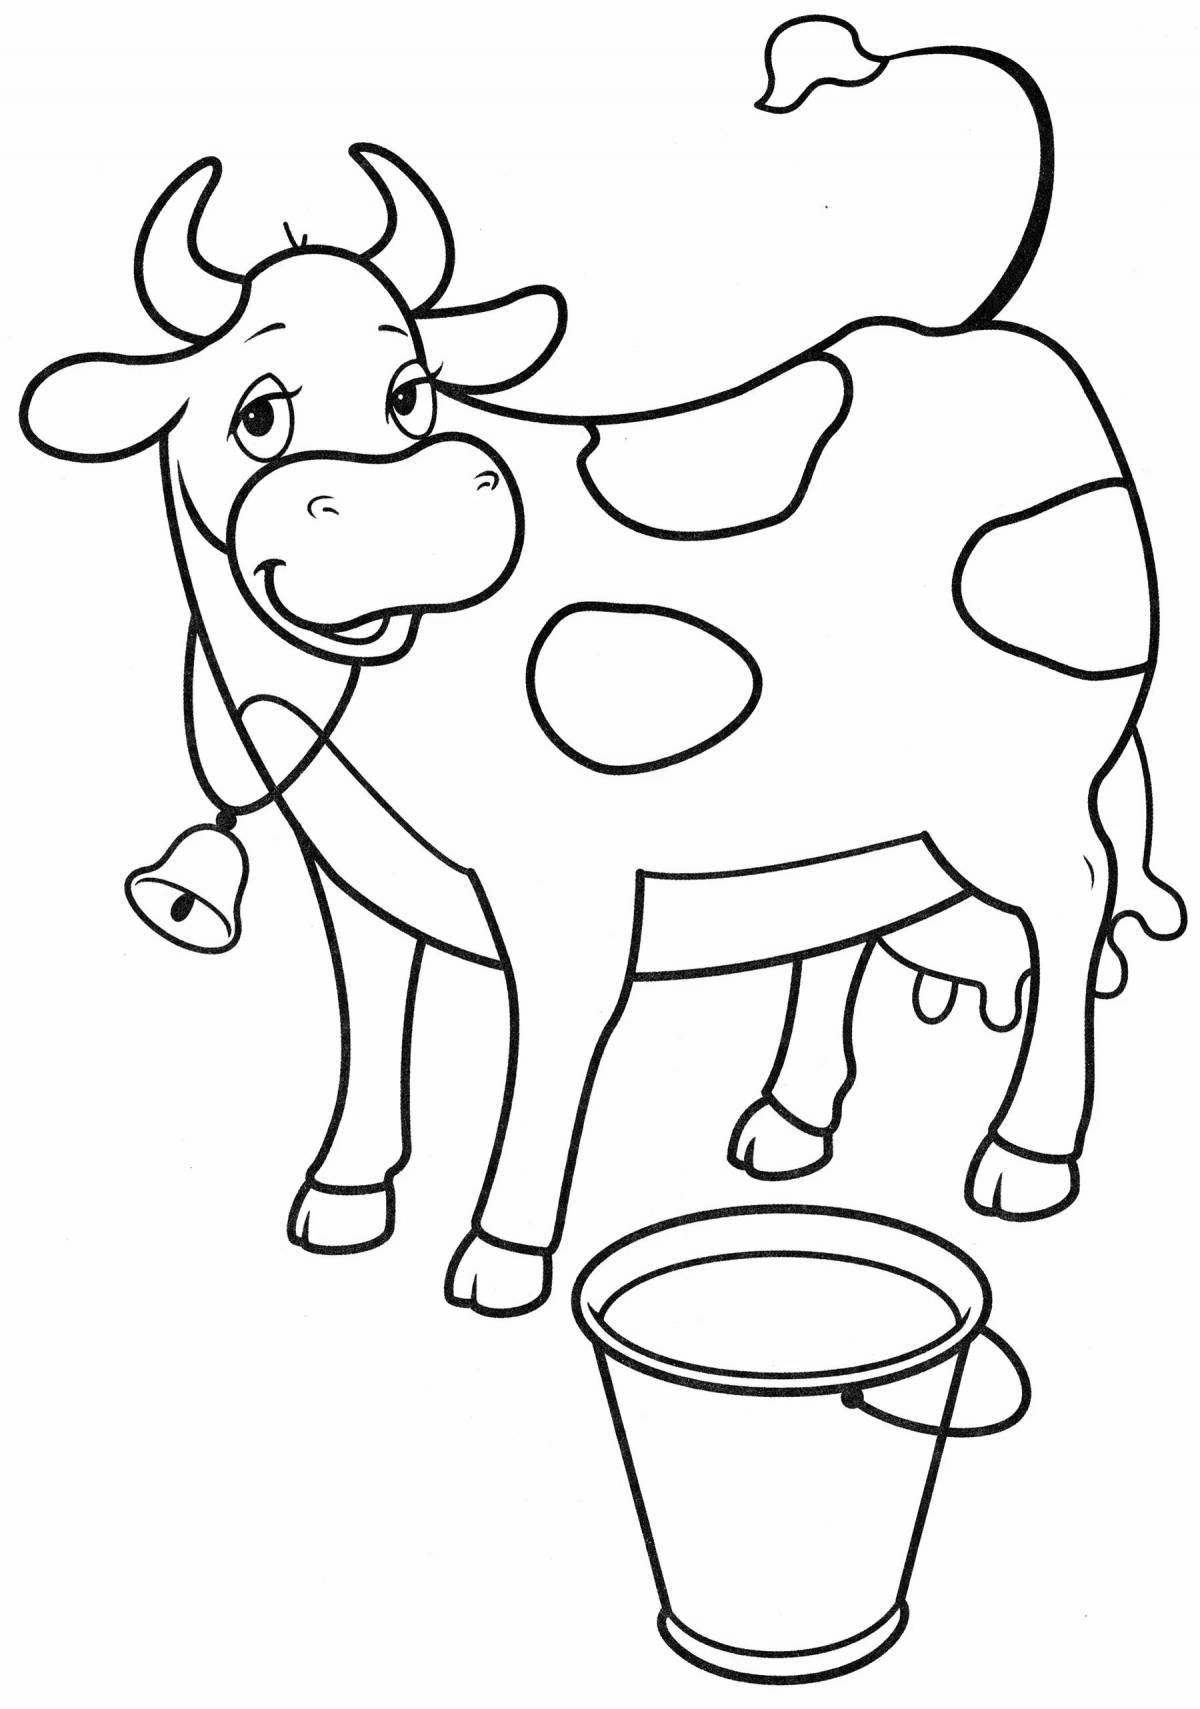 Coloring cute cow for children 4-5 years old